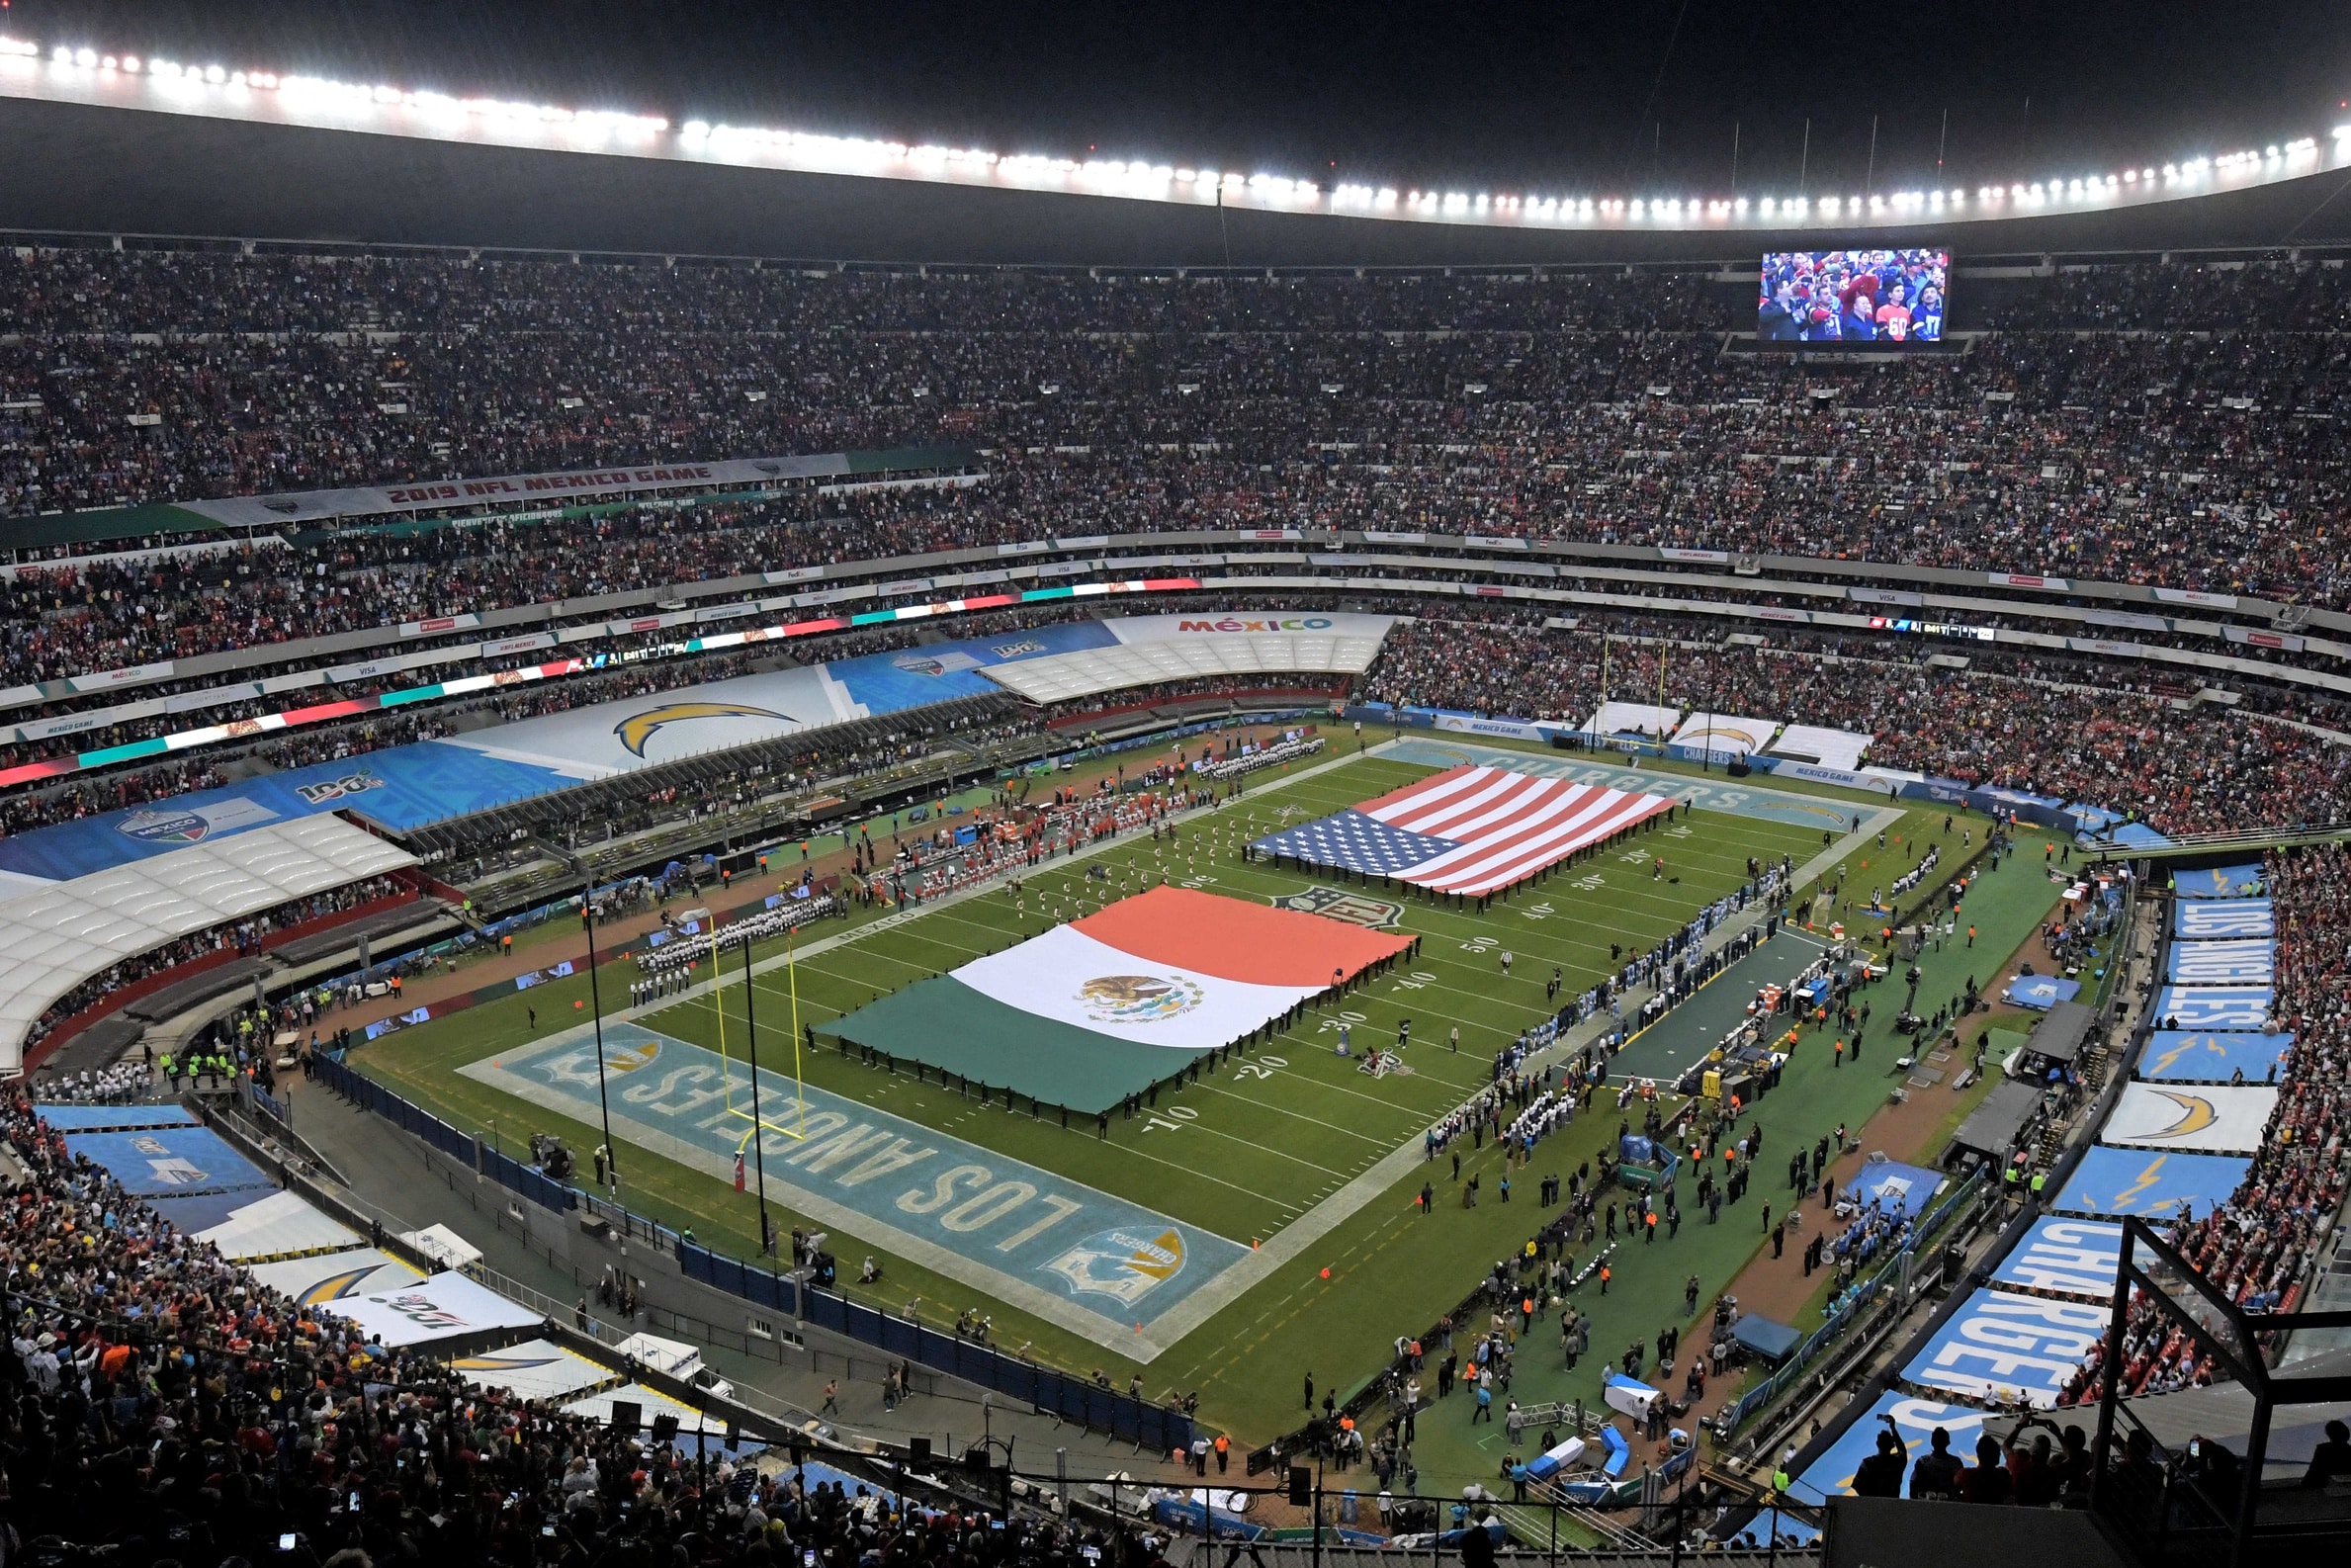 Mexican and American national flags on field ahead of NFL game in Mexico